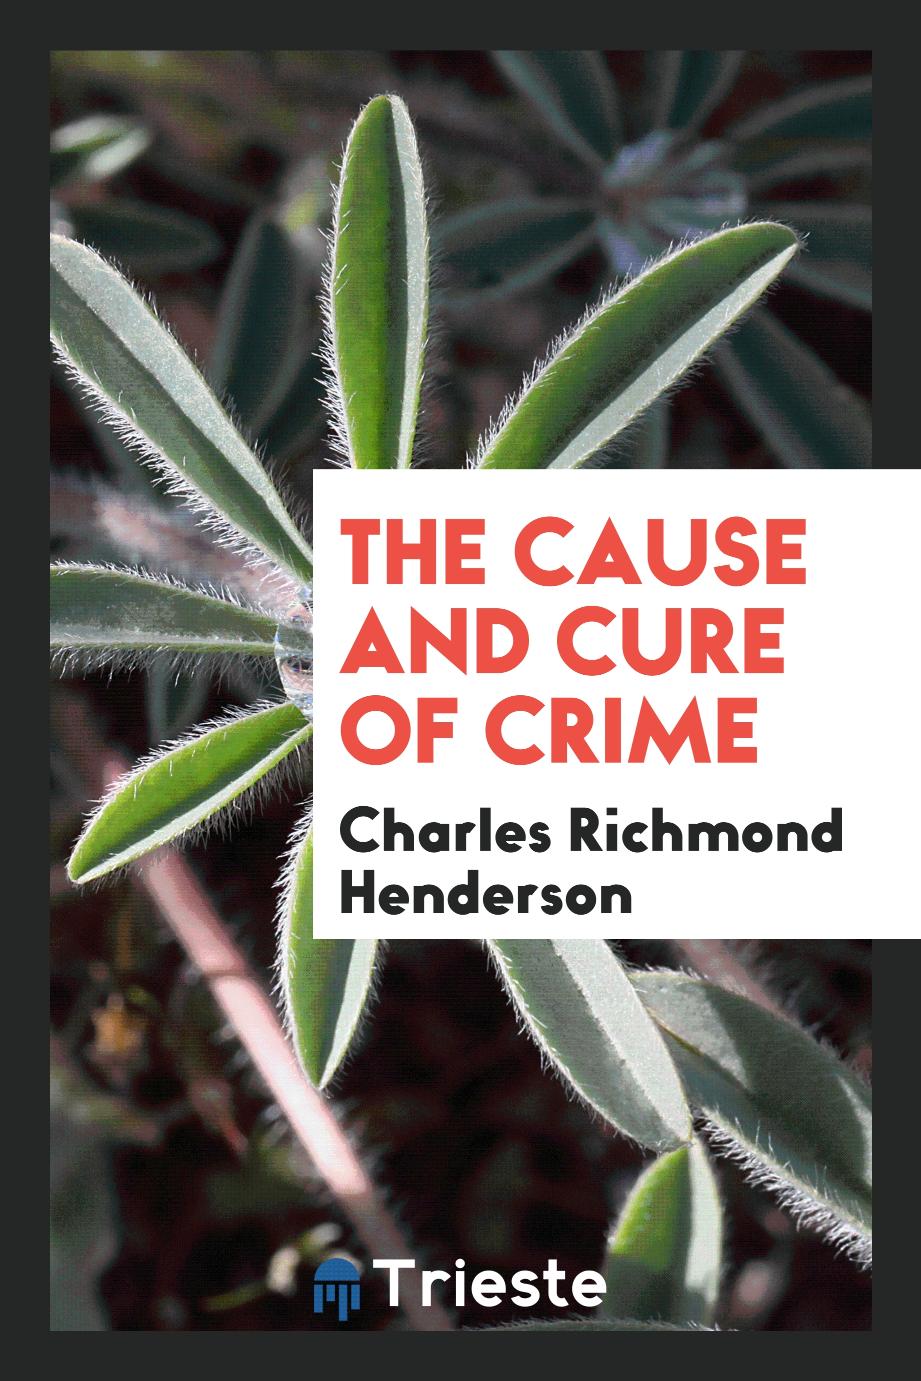 The cause and cure of crime